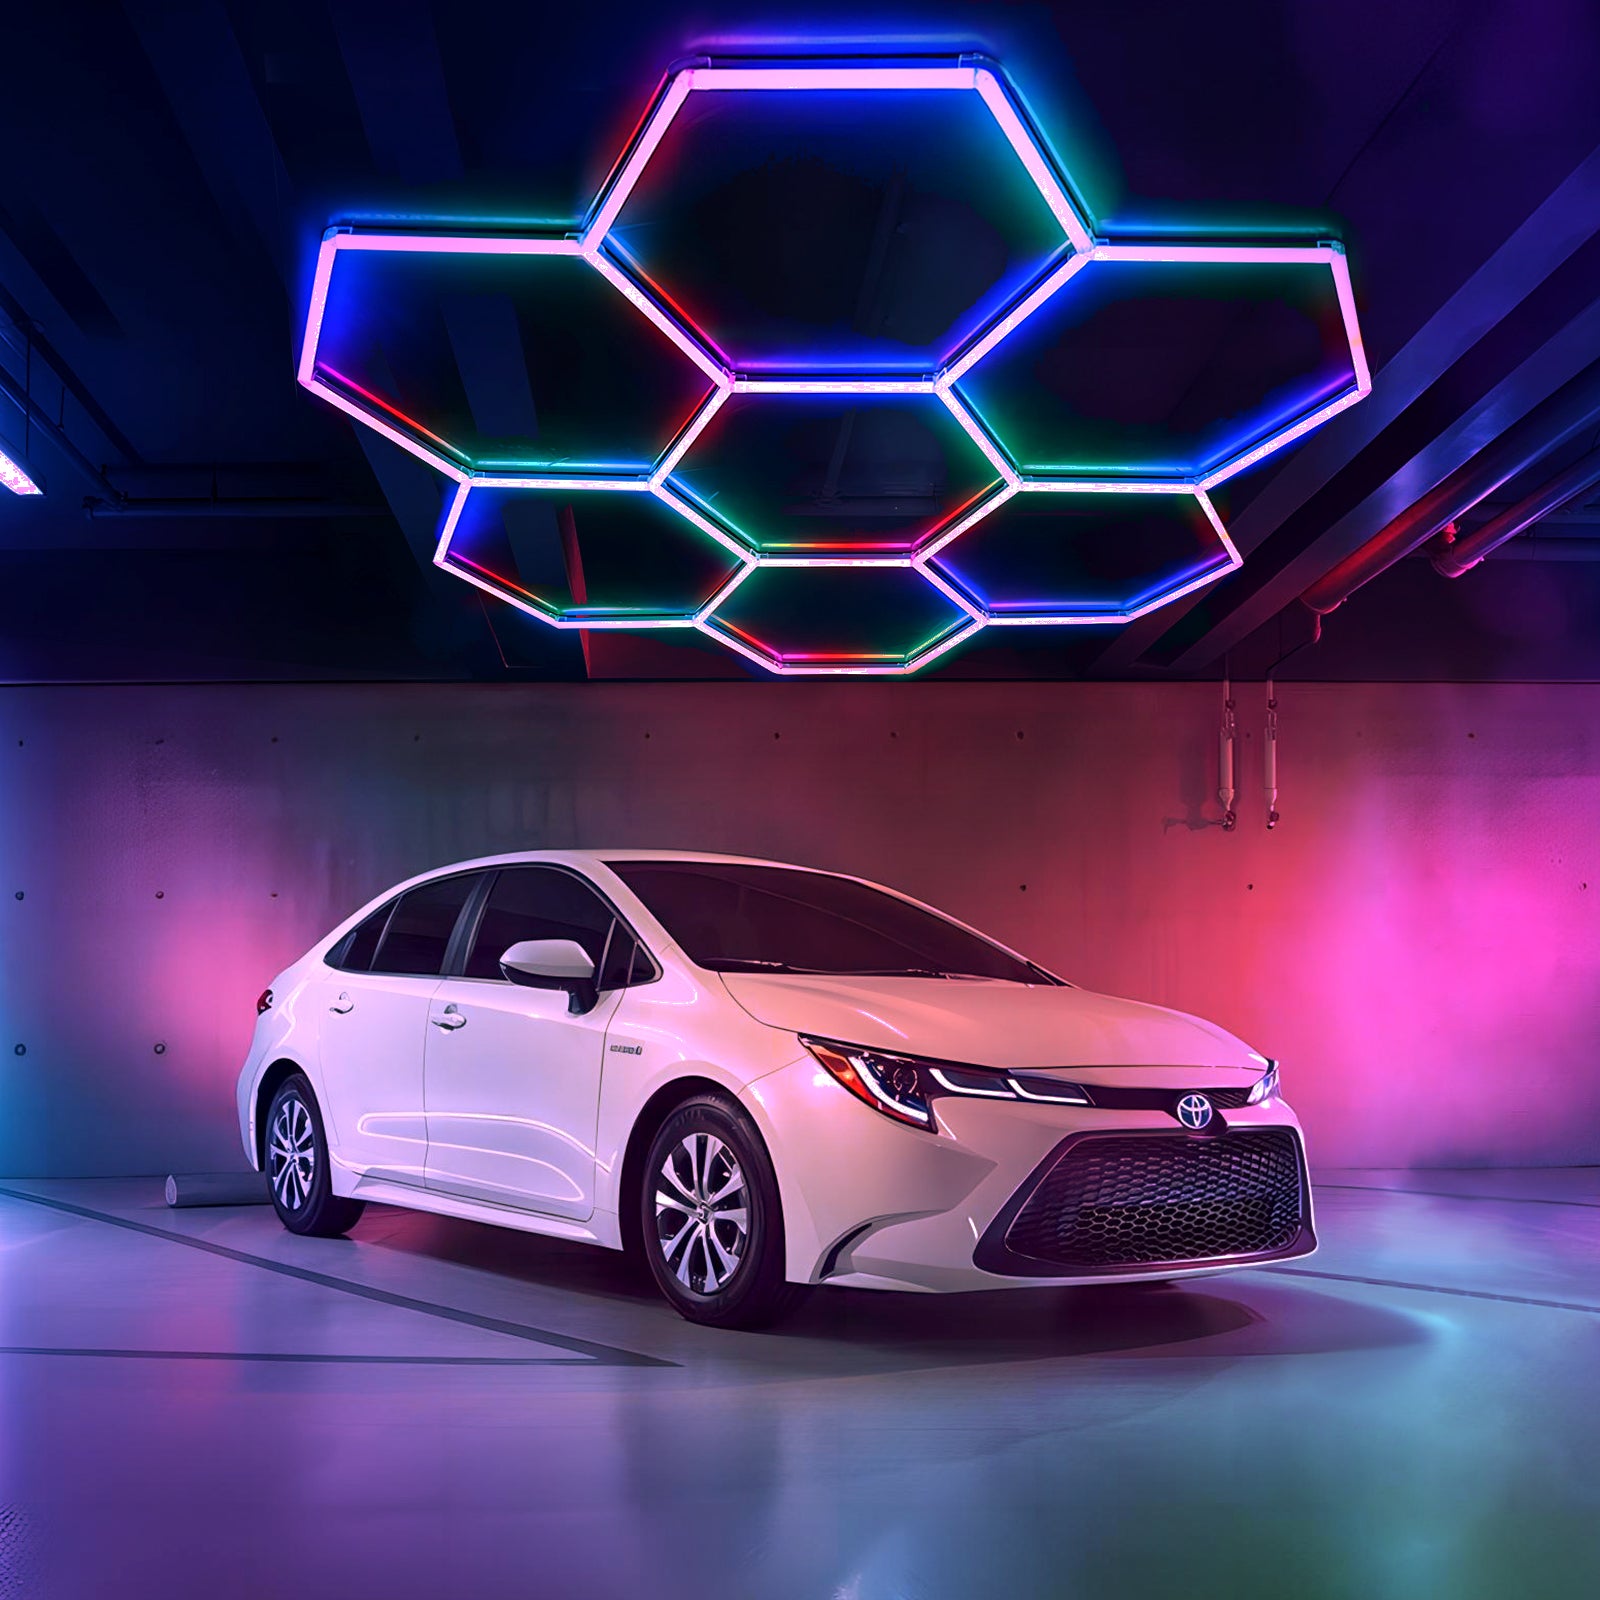 Colorix Hexa Light RGB11 used in a gaming setup, providing customizable and vibrant hexagonal LED lighting for an immersive experience.